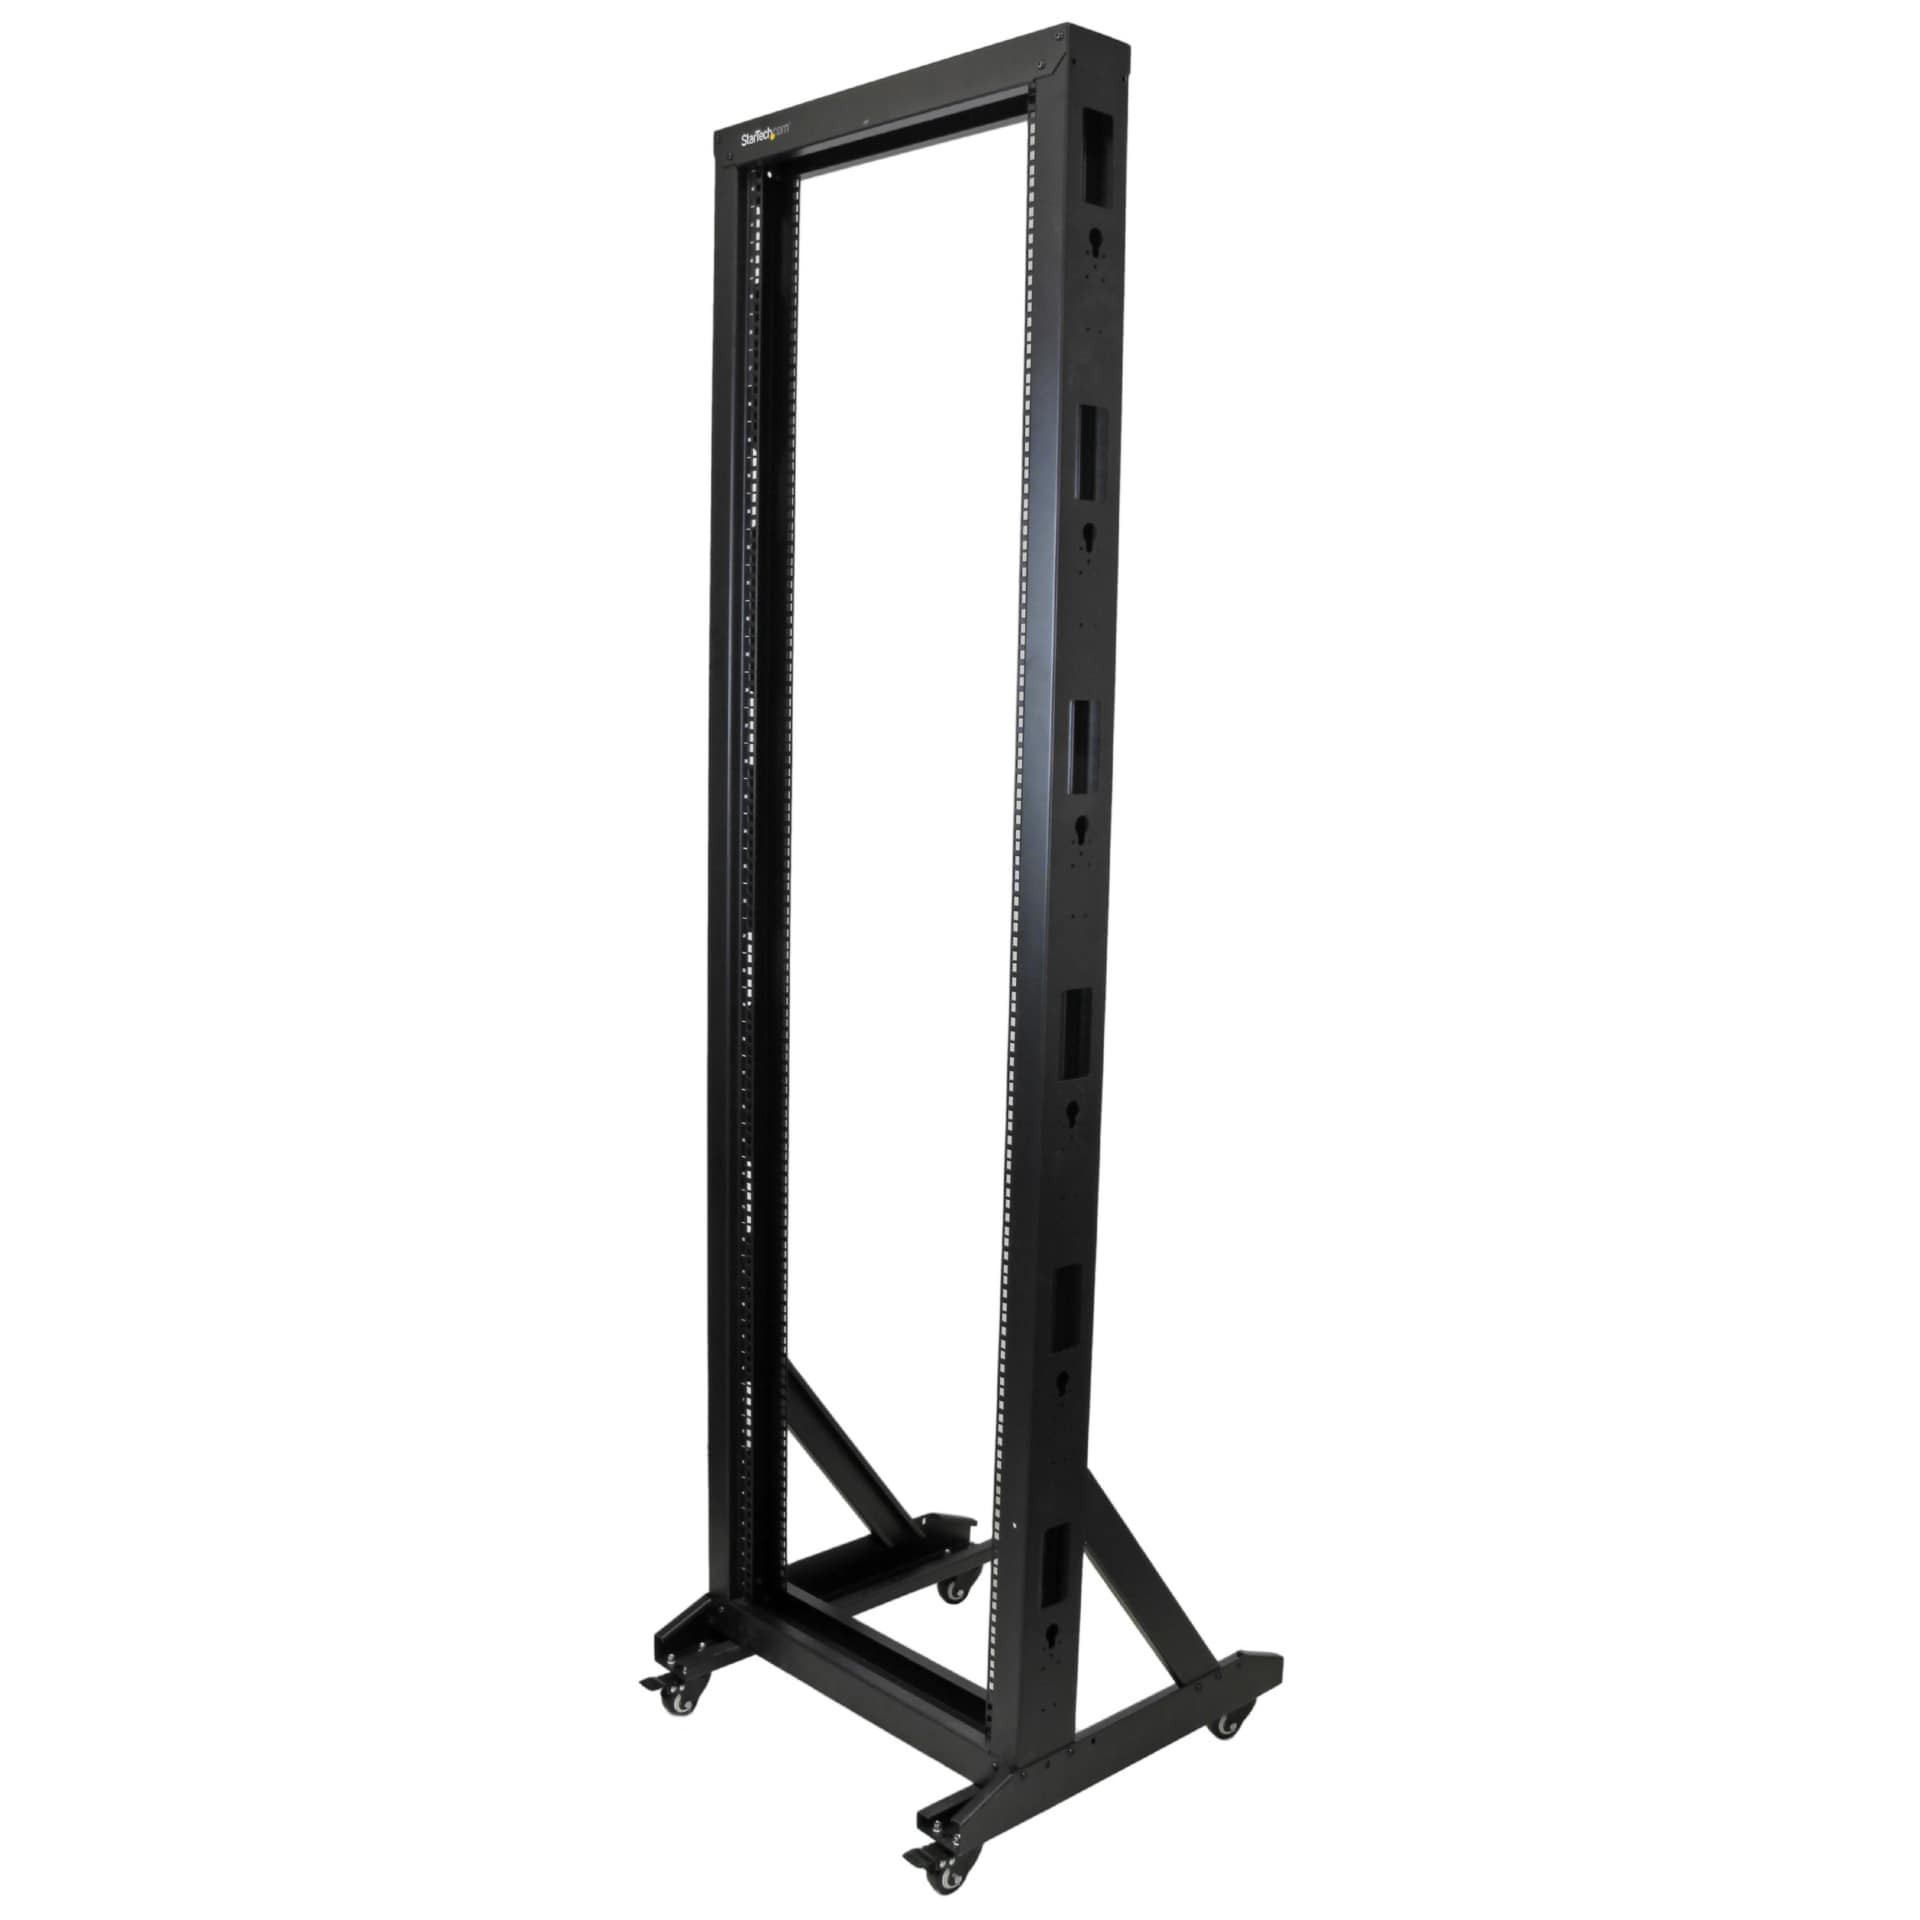 StarTech.com 2-Post 42U Mobile Open Frame Server Rack with Casters, Two Post 19in Rolling Network Rack for IT Equipment